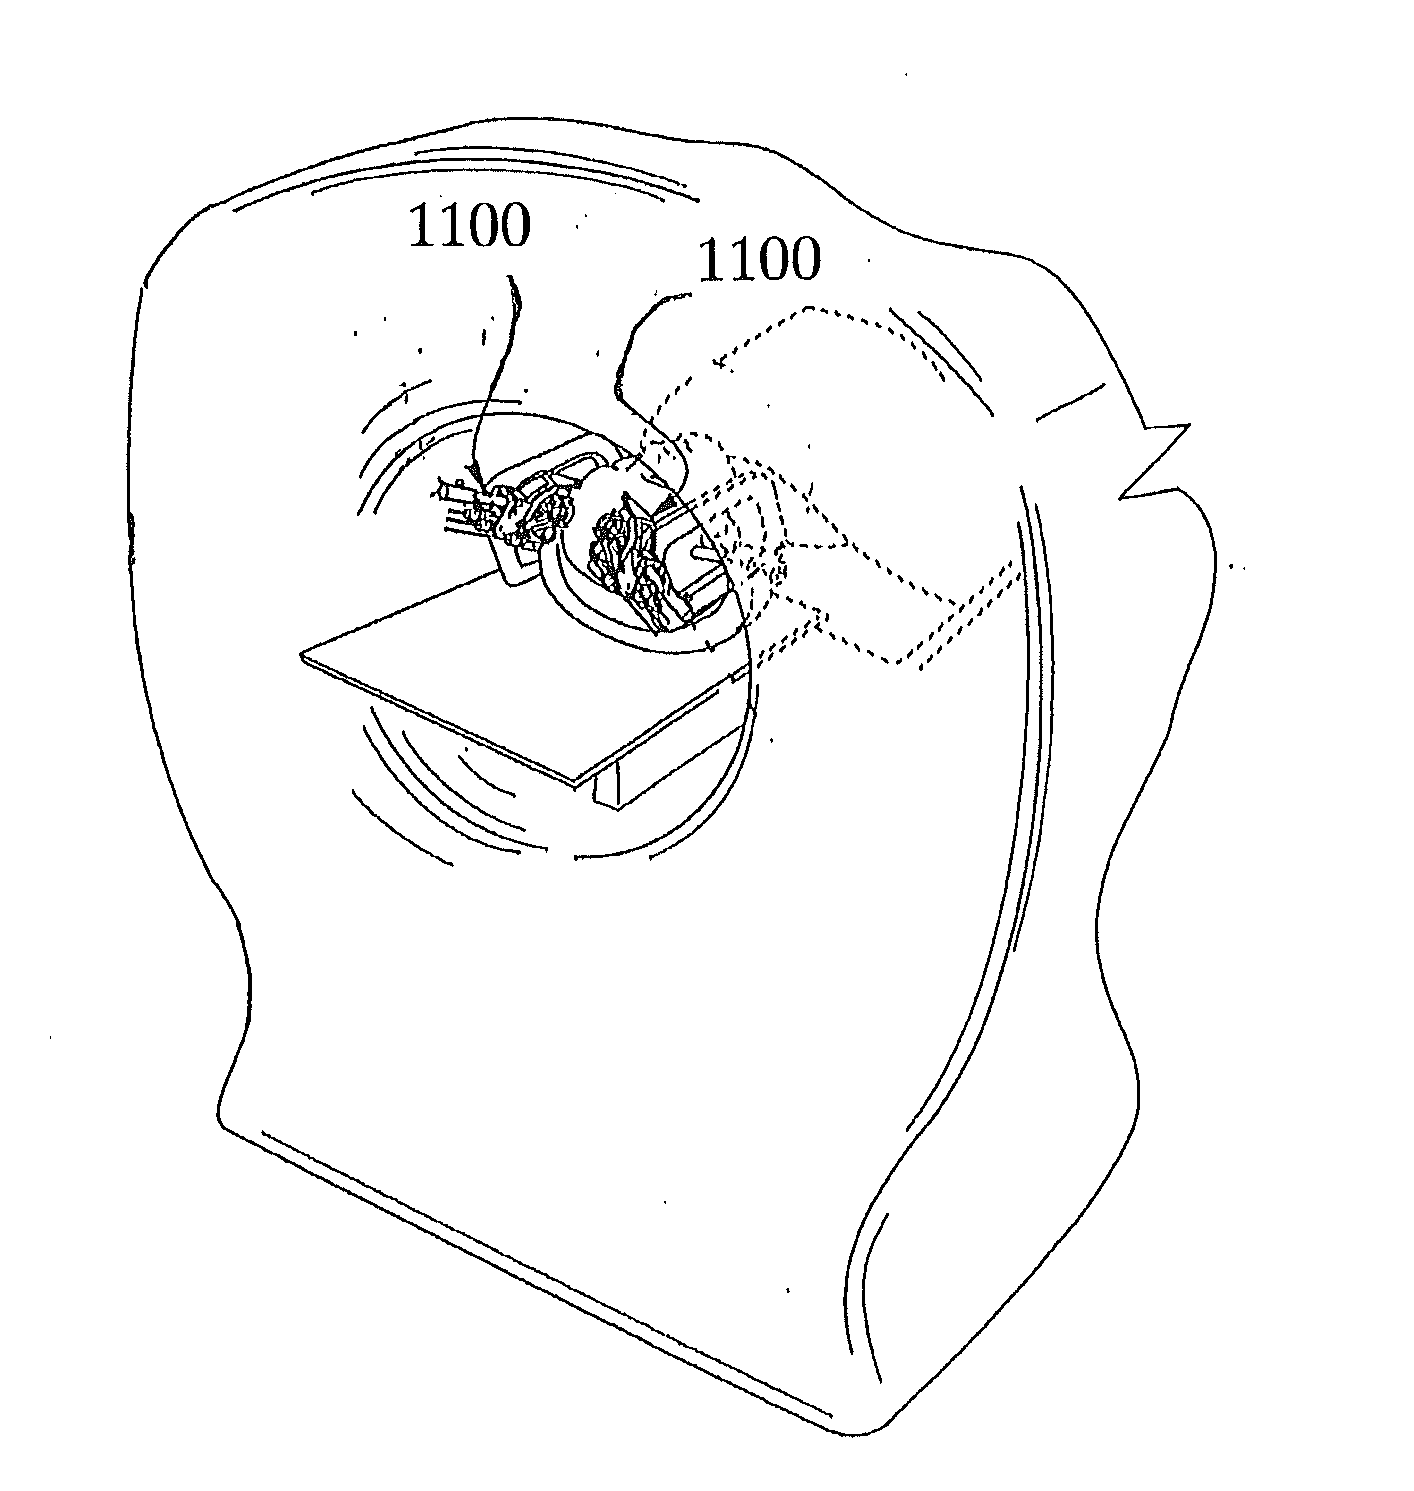 MRI-Guided Medical Interventional Systems and Methods